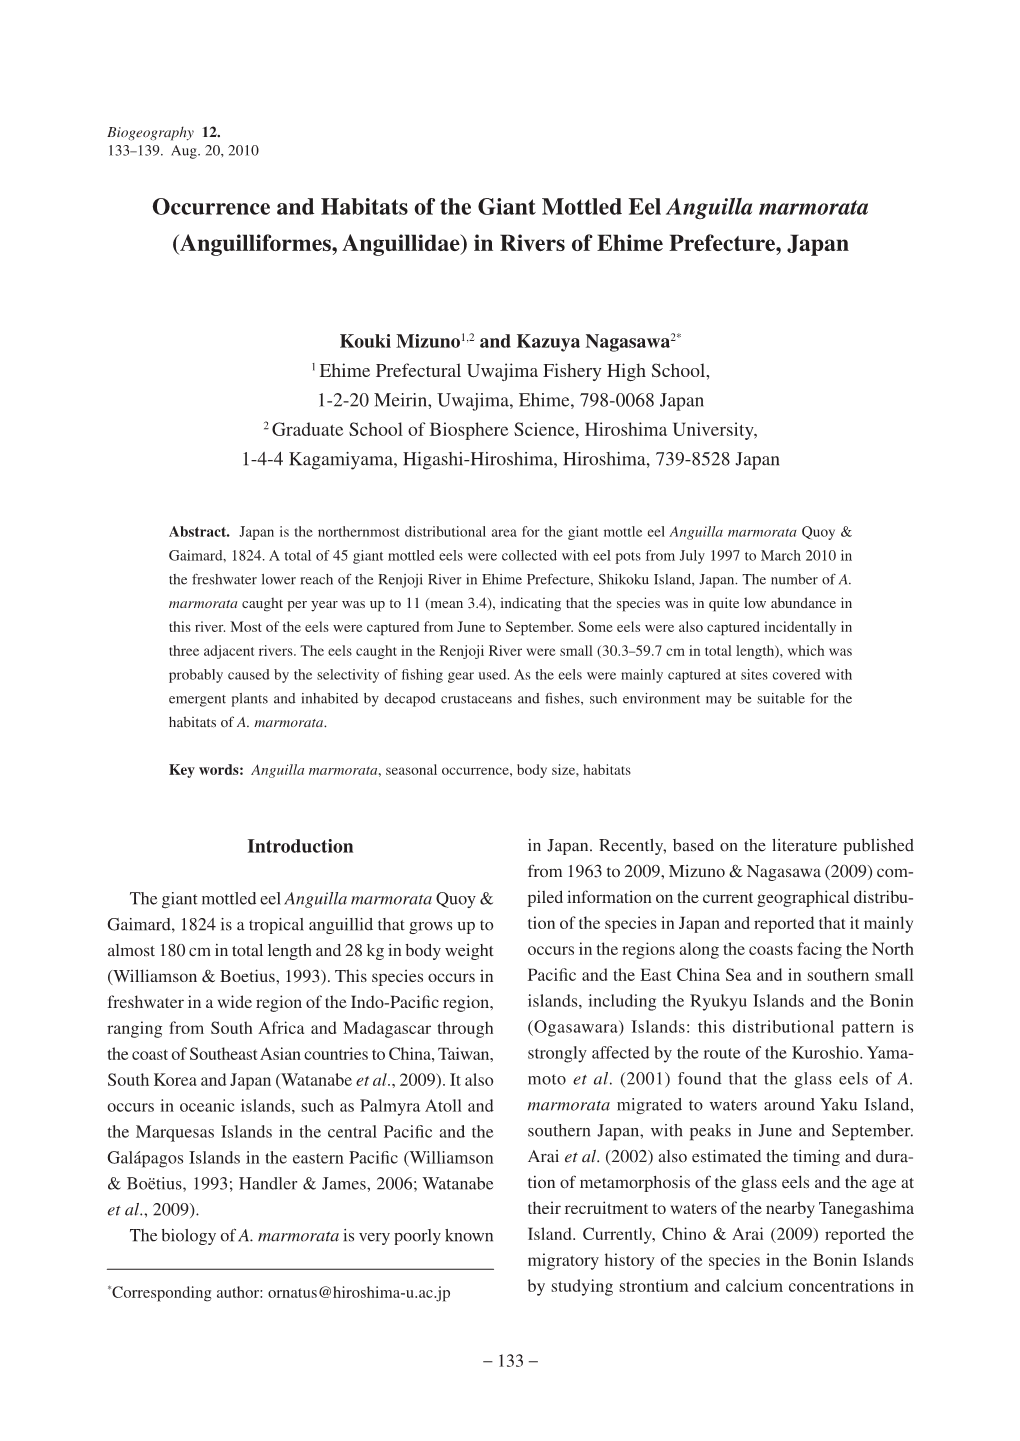 Occurrence and Habitats of the Giant Mottled Eel Anguilla Marmorata (Anguilliformes, Anguillidae) in Rivers of Ehime Prefecture, Japan